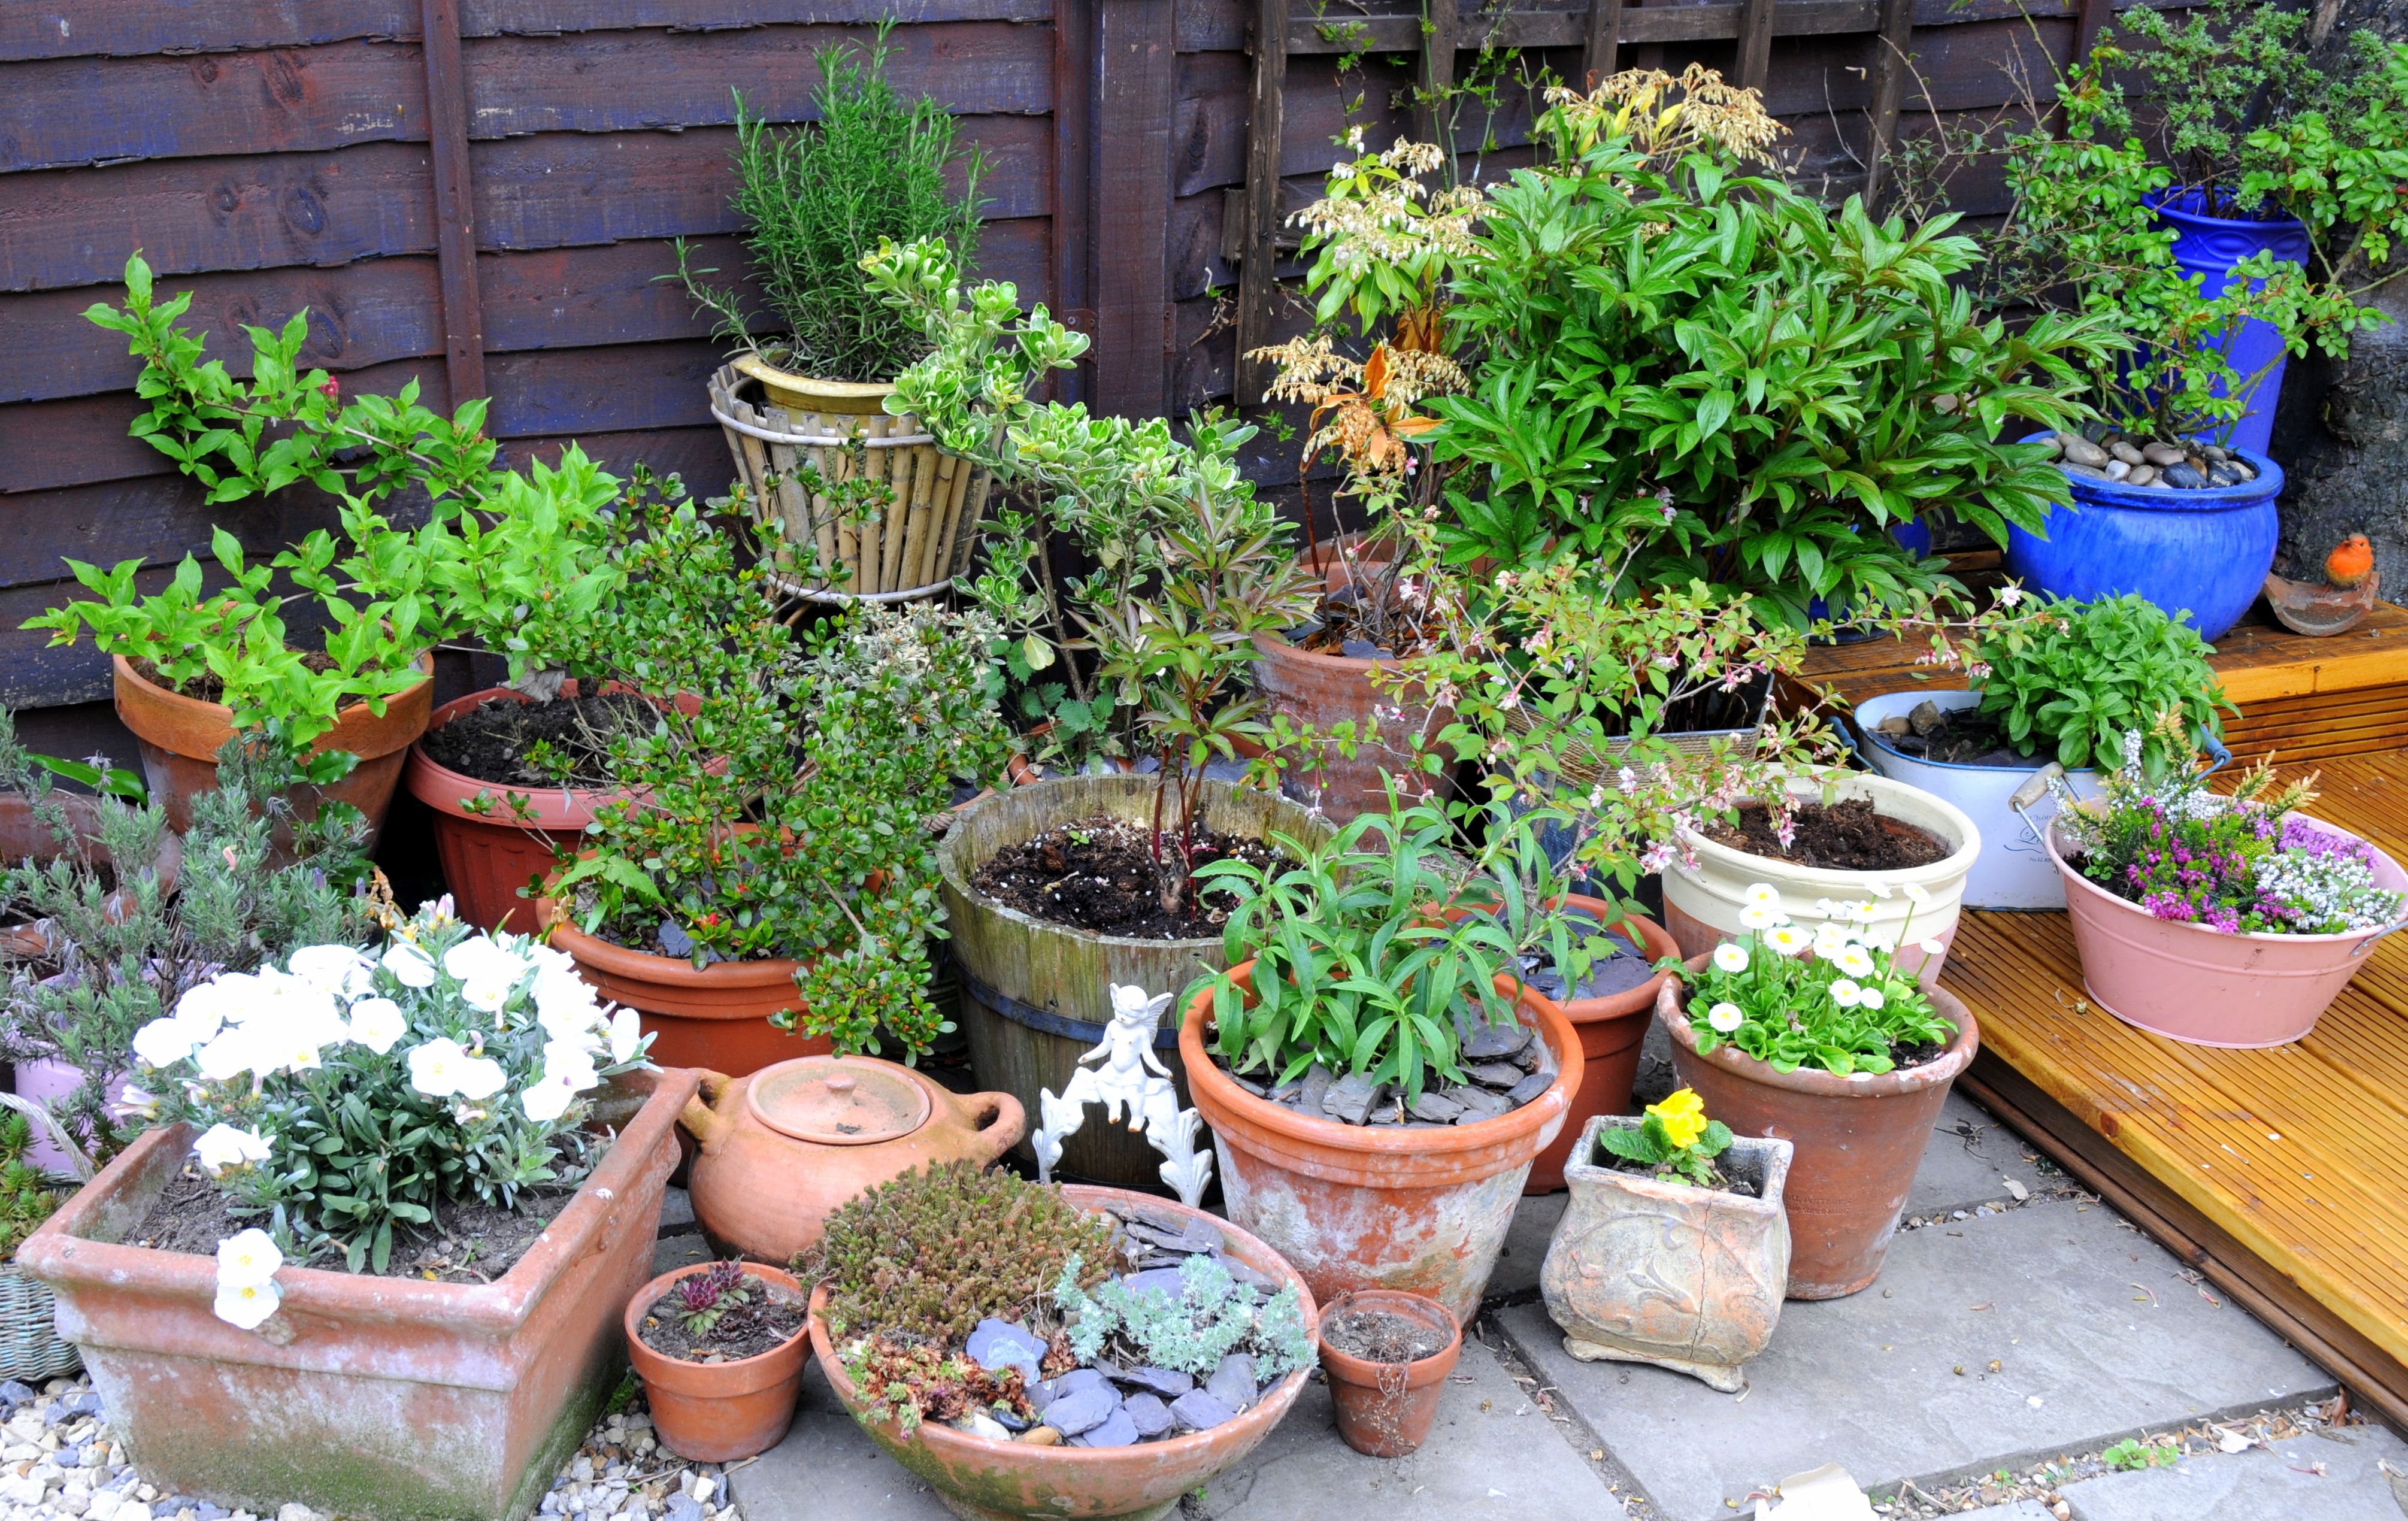 III. Choosing the Right Containers for Urban Gardening